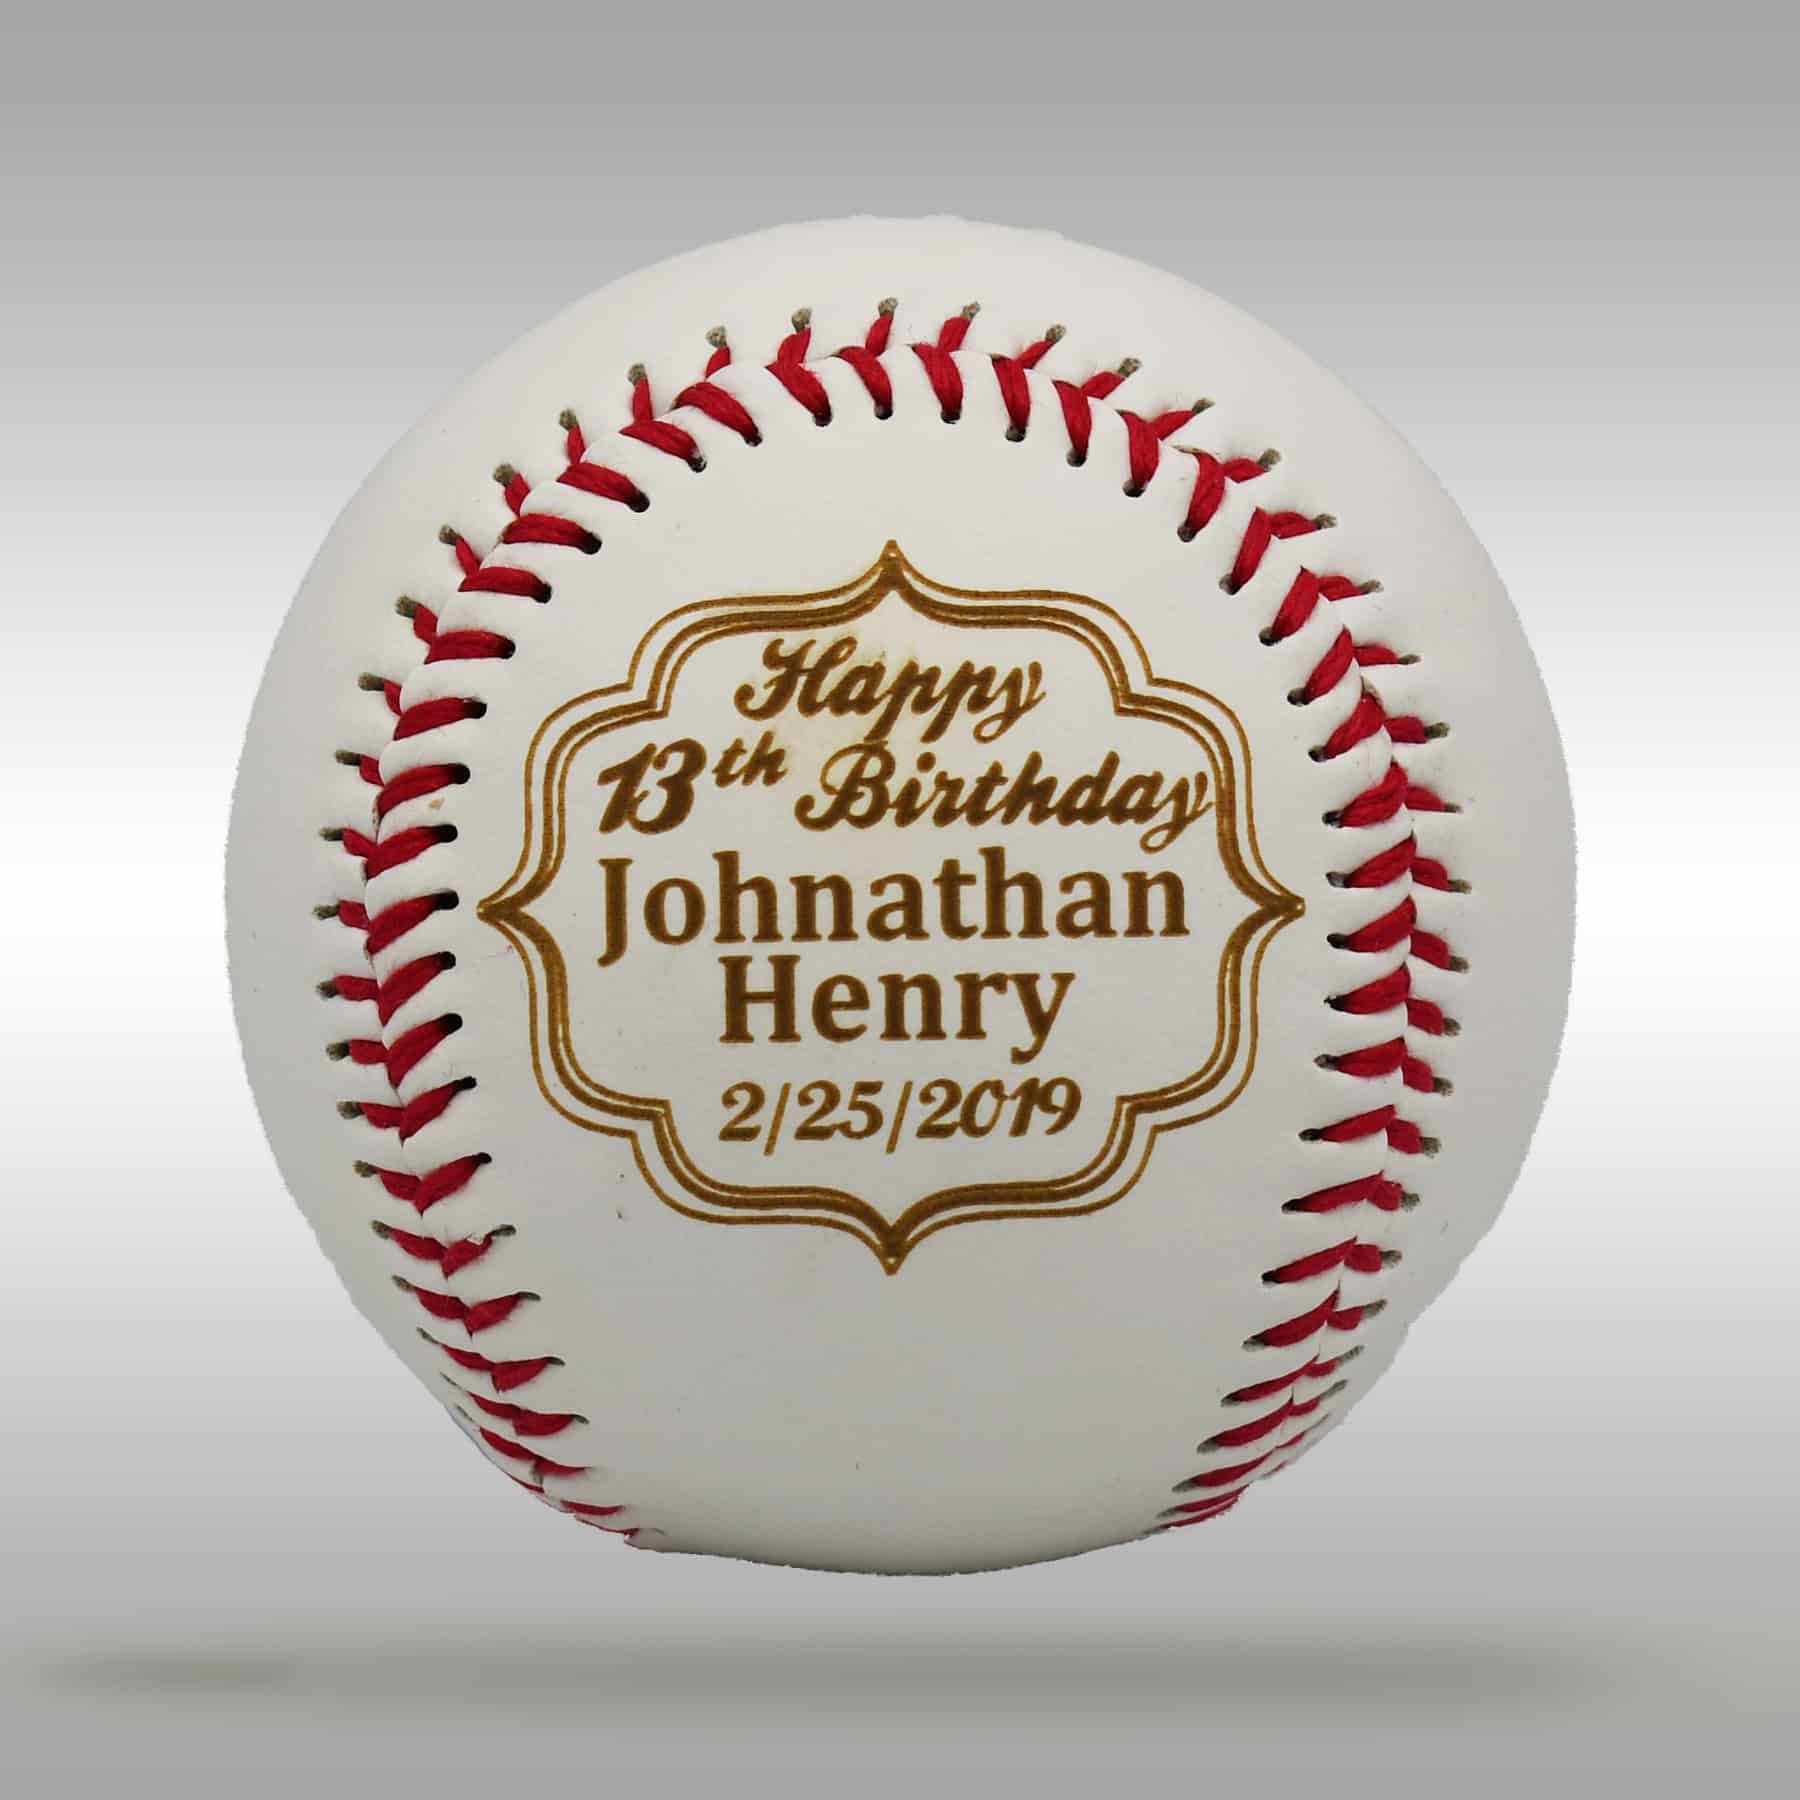 Personalized Mother's Day Gift - Classic Design - Cooperstown Bat Company